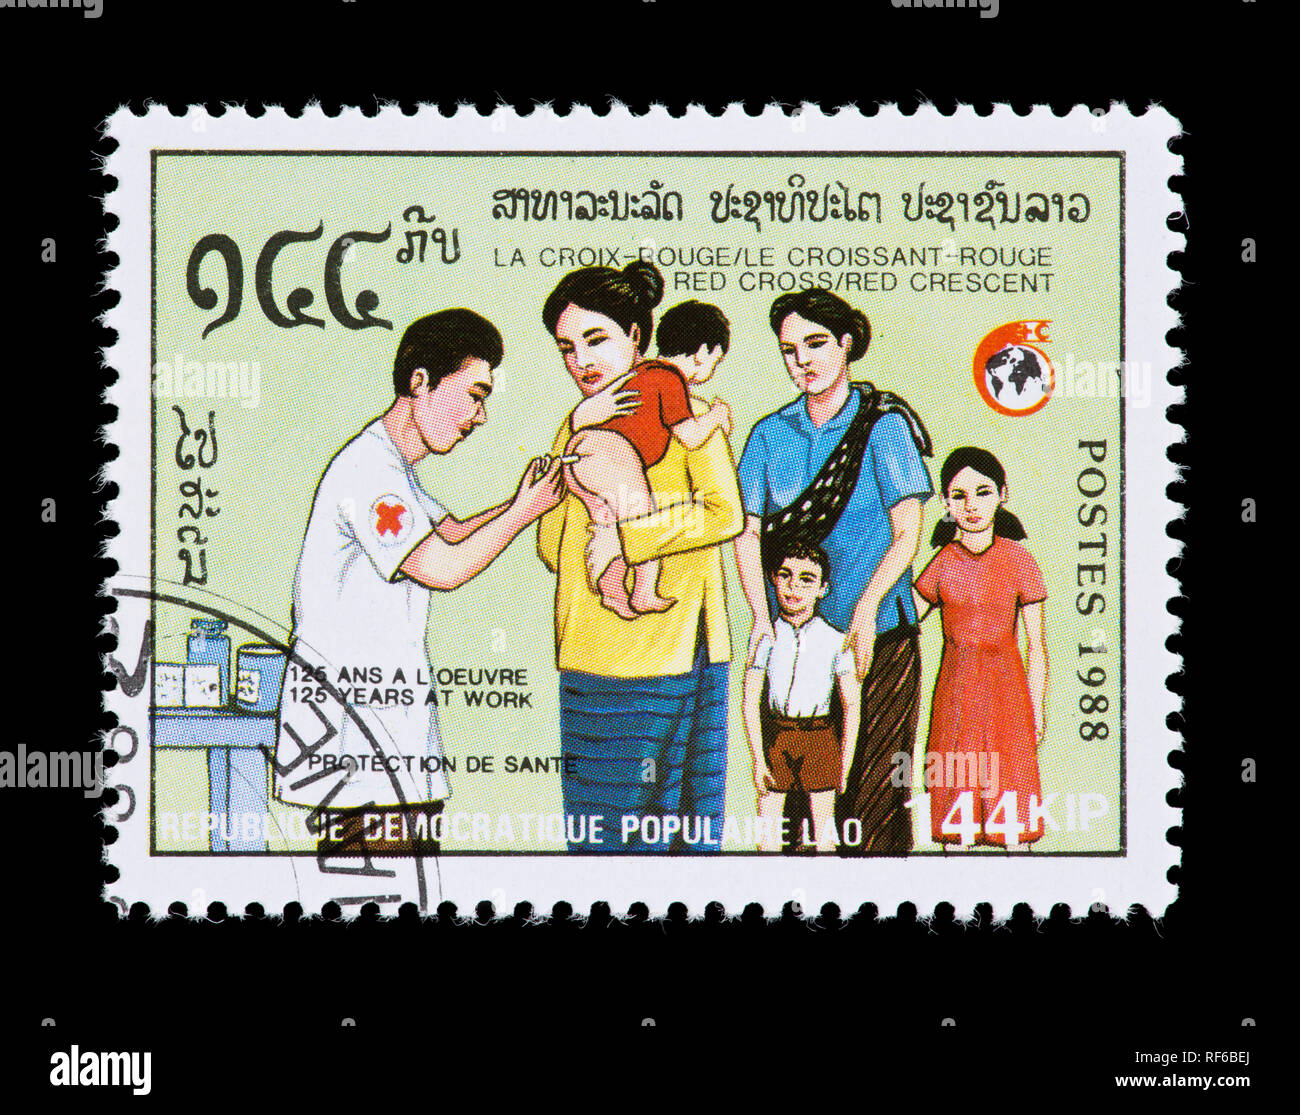 Postage stamp from Laos depicting an infant being immunized, 125th anniversary of the Red Cross and Red Crescent. Stock Photo